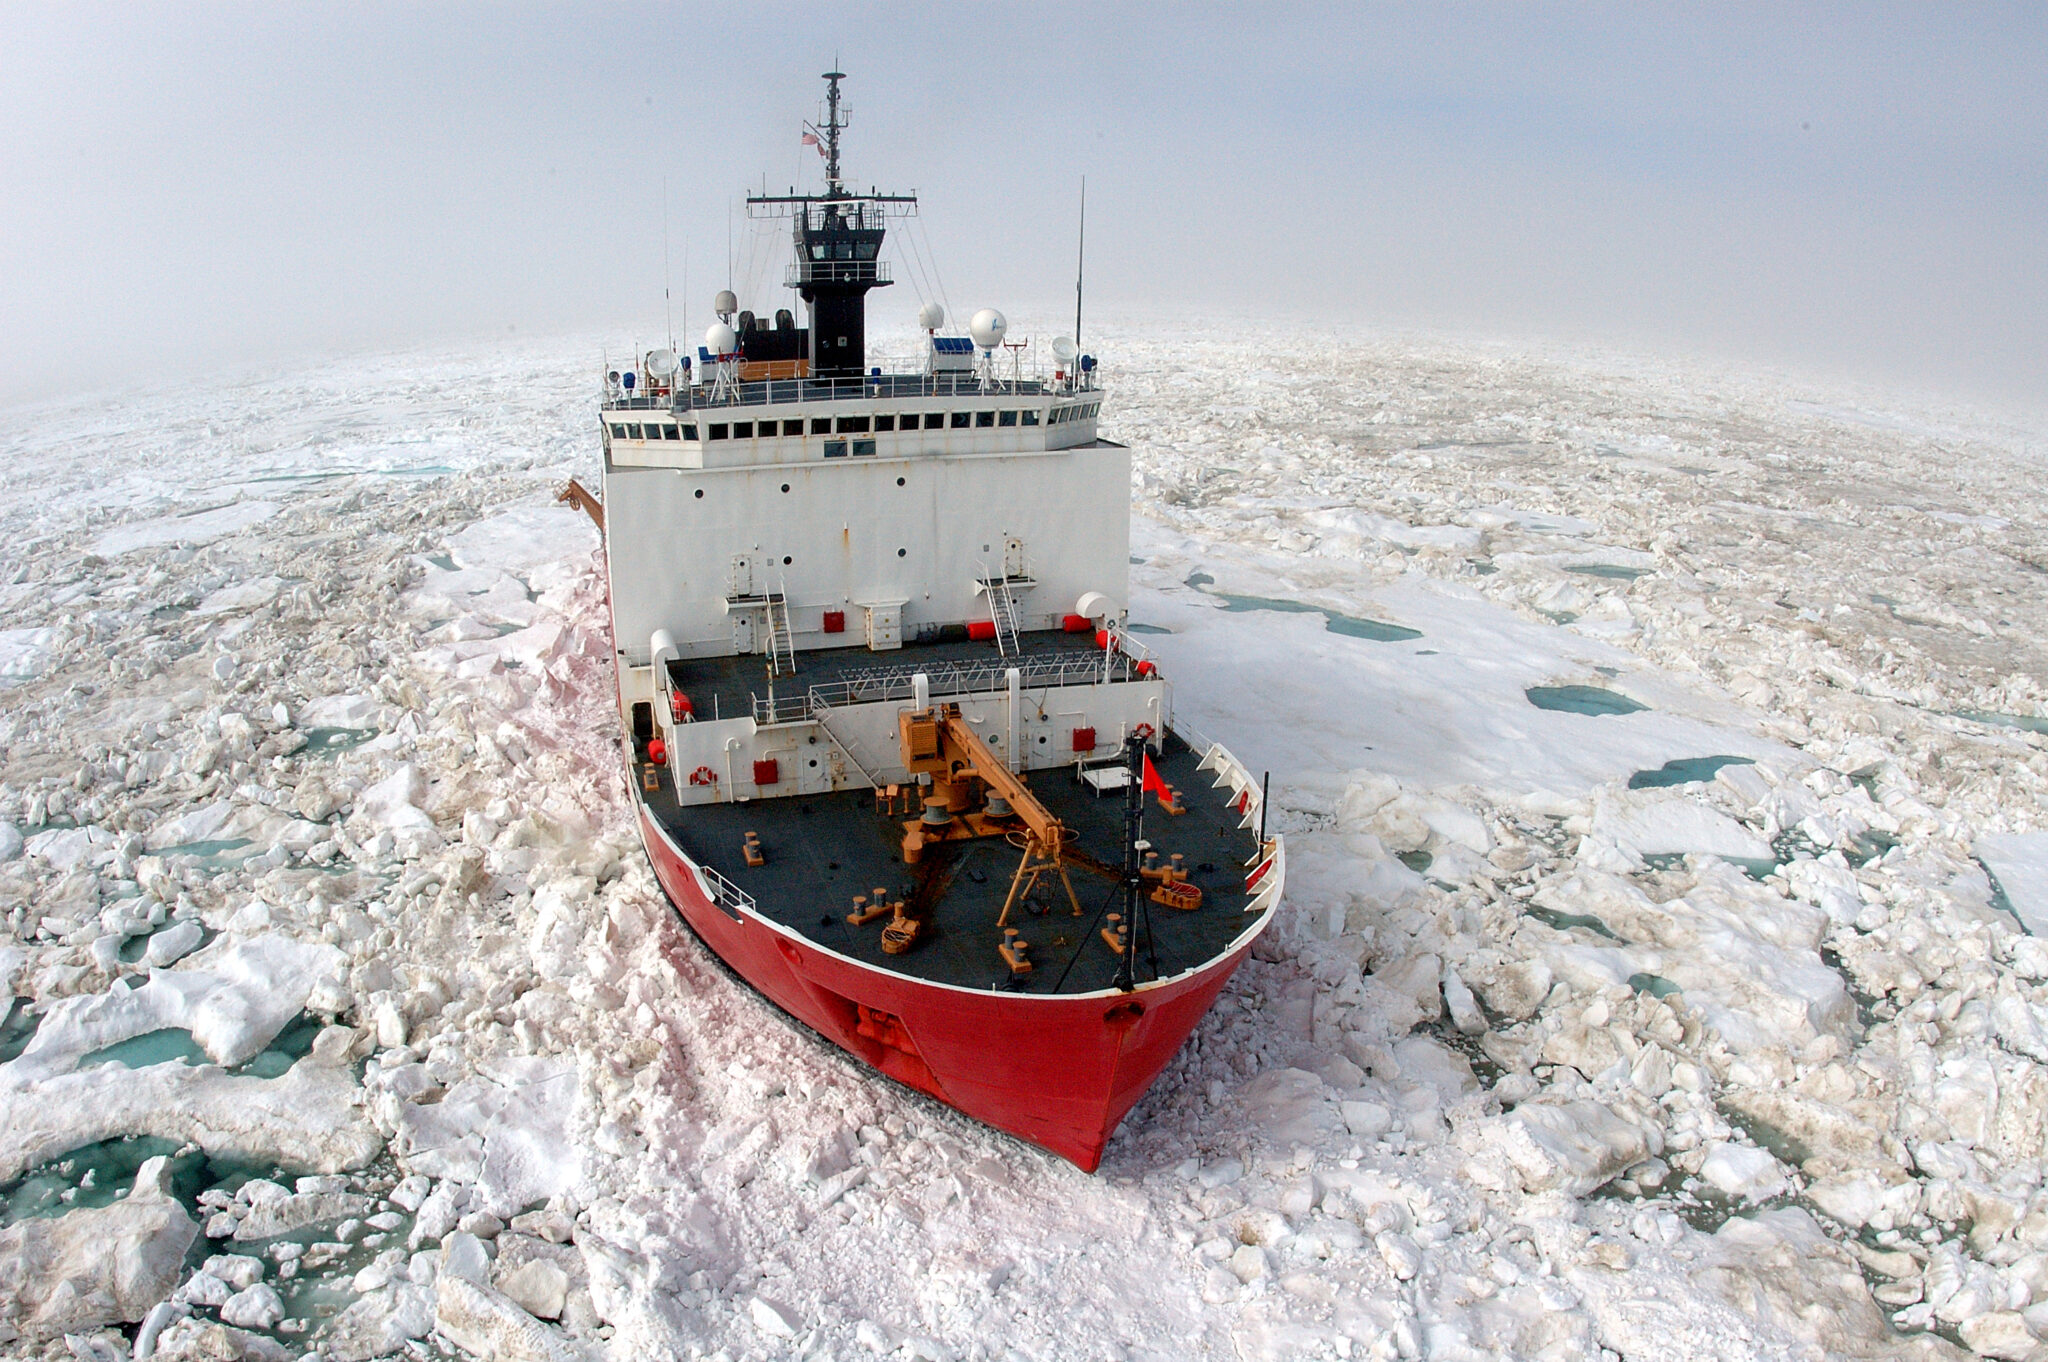 Nation’s Largest Icebreaker Healy Enroute to Alaska for Three Arctic Research Missions